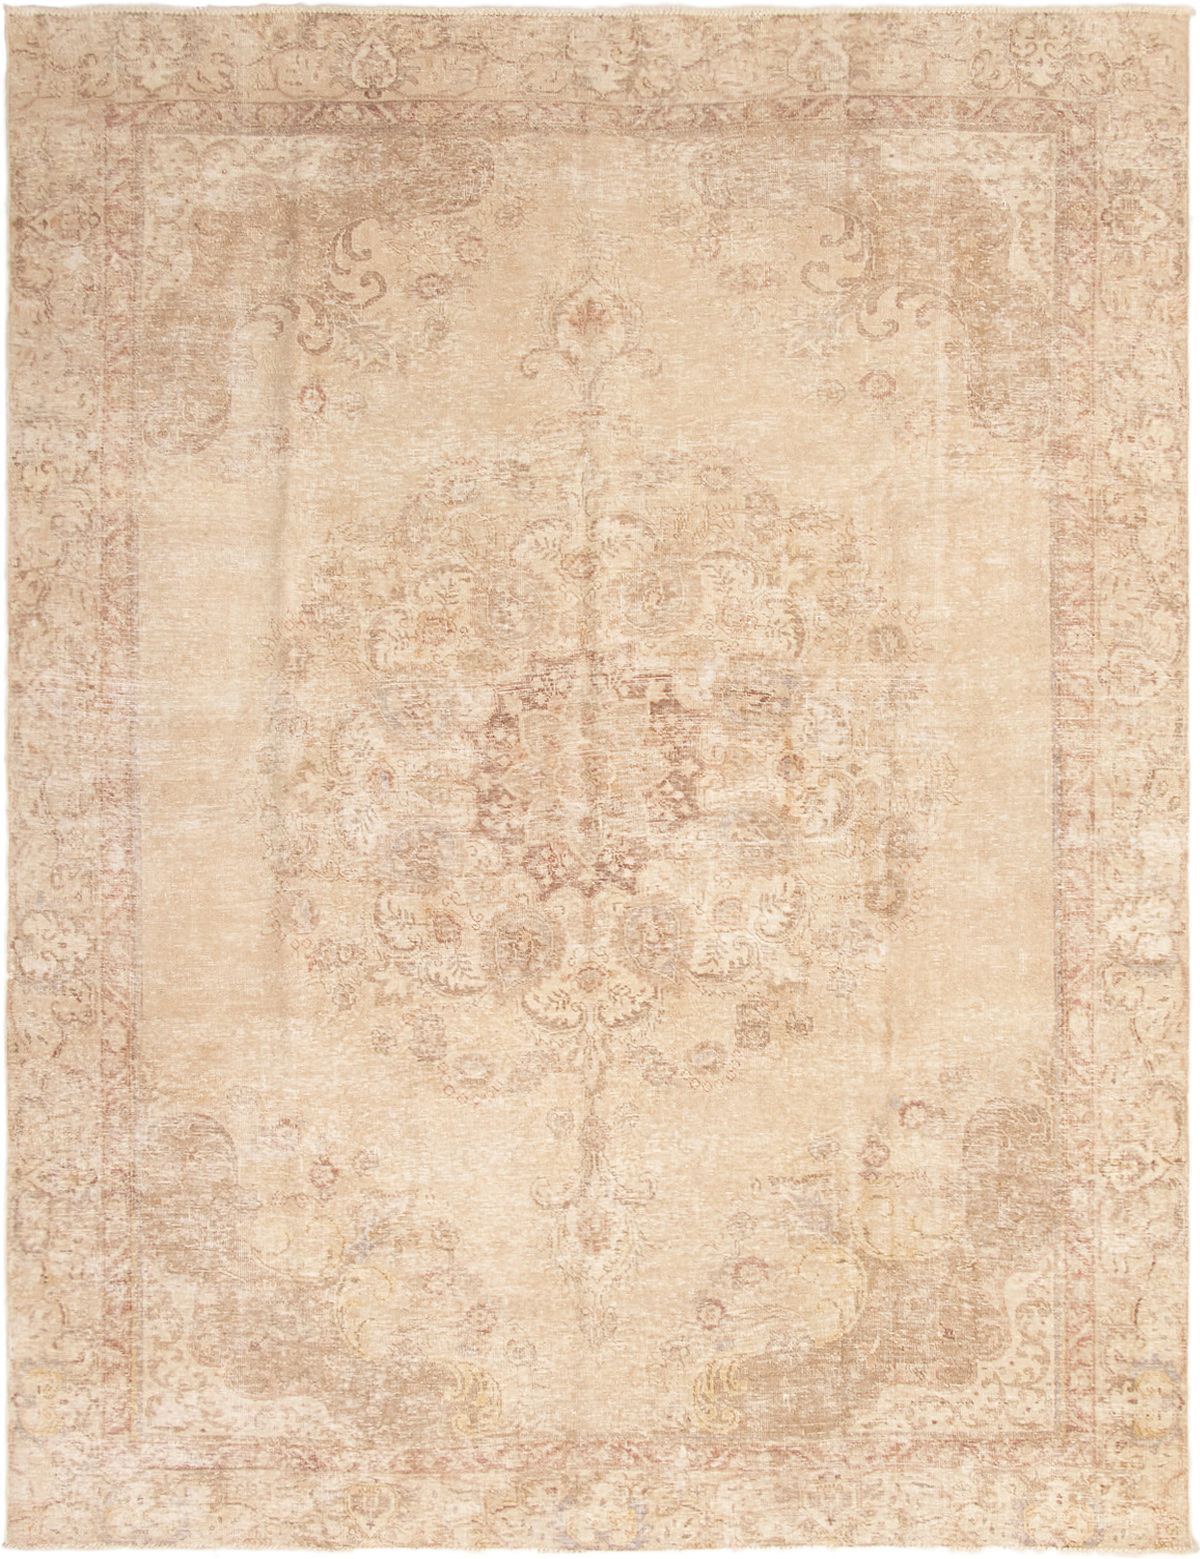 Hand-knotted Color Transition Khaki Wool Rug 9'4" x 12'3" Size: 9'4" x 12'3"  